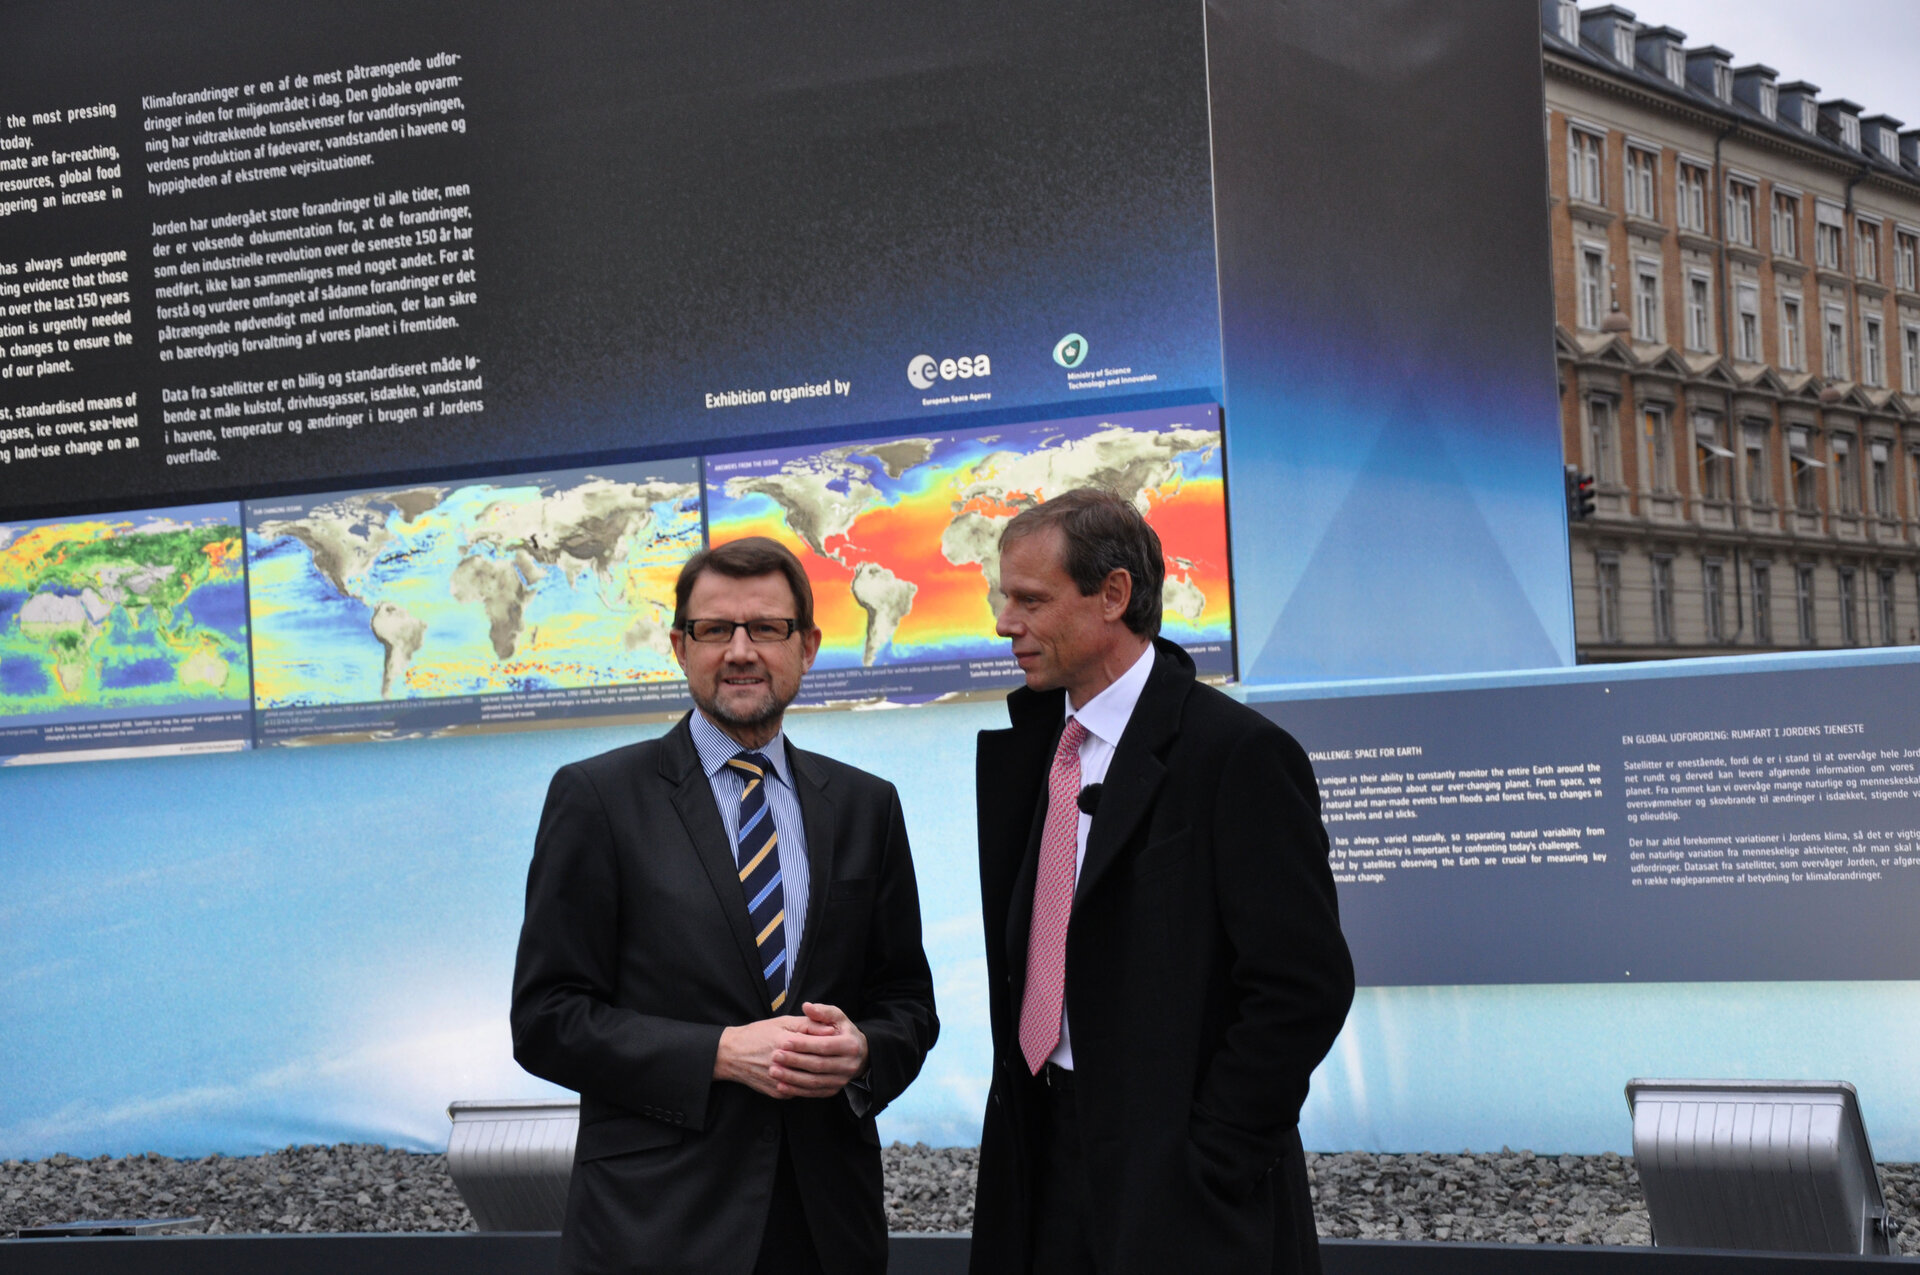 H. Sander (left) and ESA astronaut C. Fuglesang in front of the exhibit